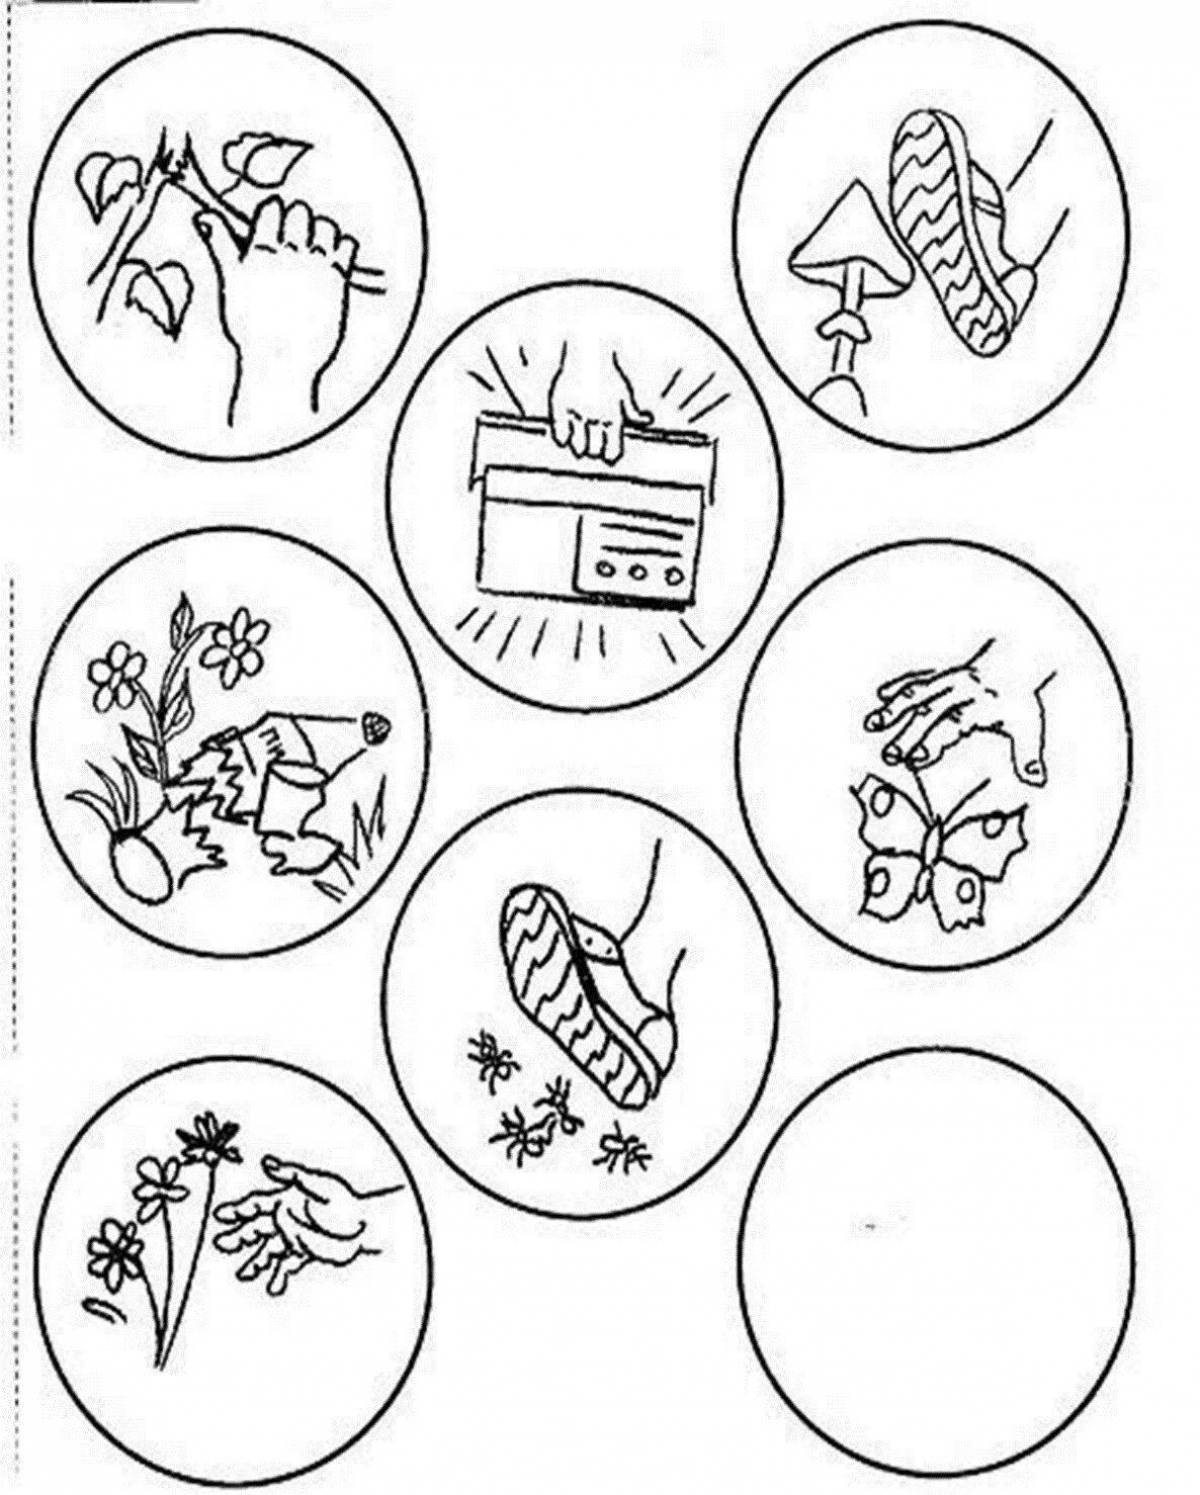 Innovative environmental protection coloring page for kids